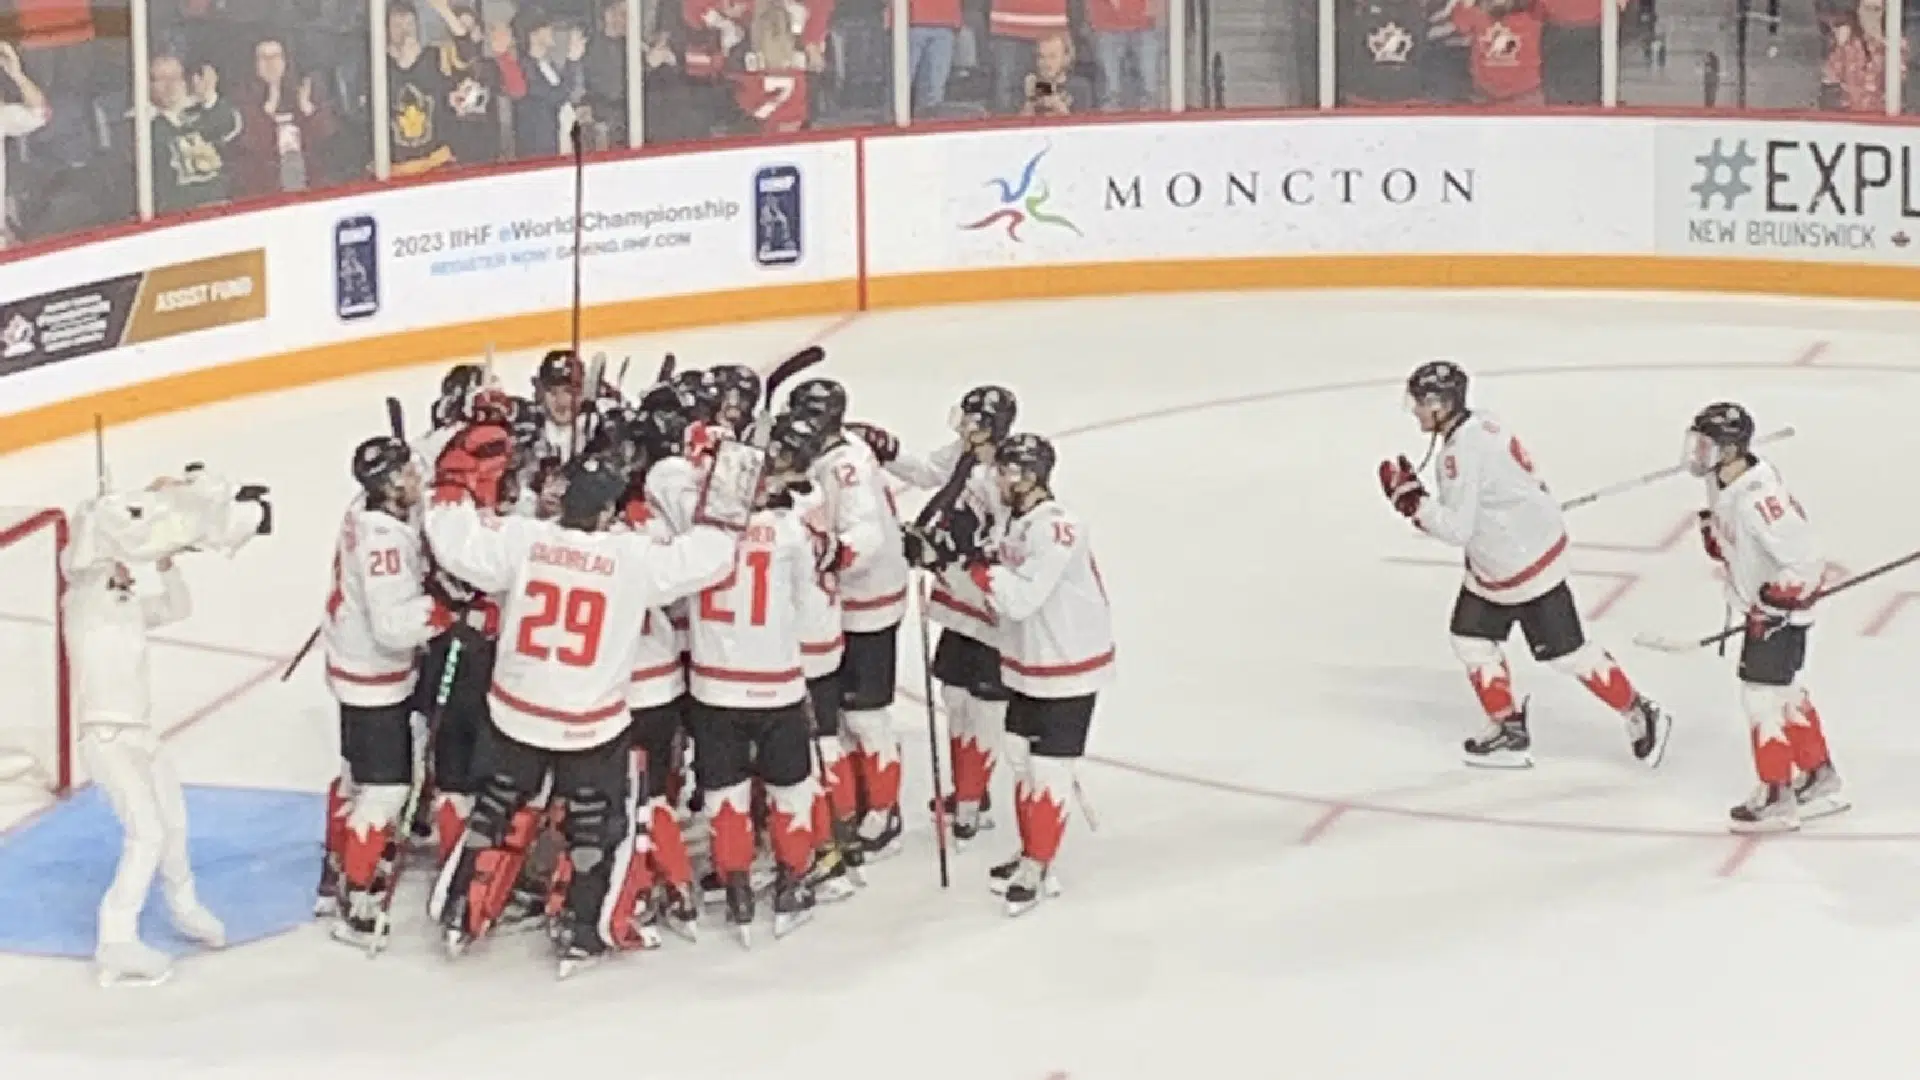 Team Canada to play for gold at IIHF World Championship - Team